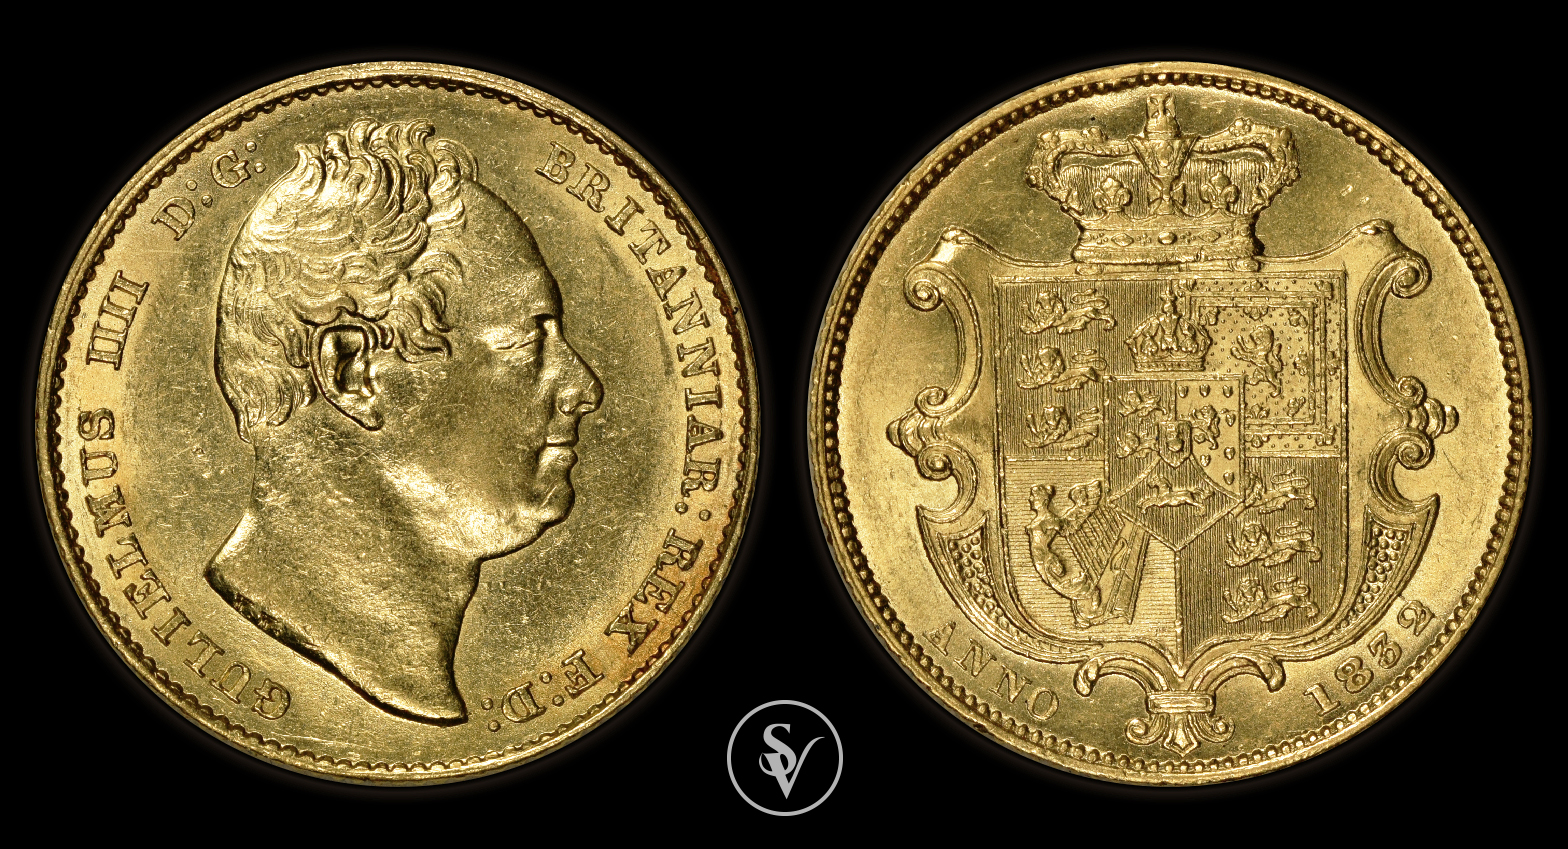 1832 William IV gold sovereign - Coins and collectables